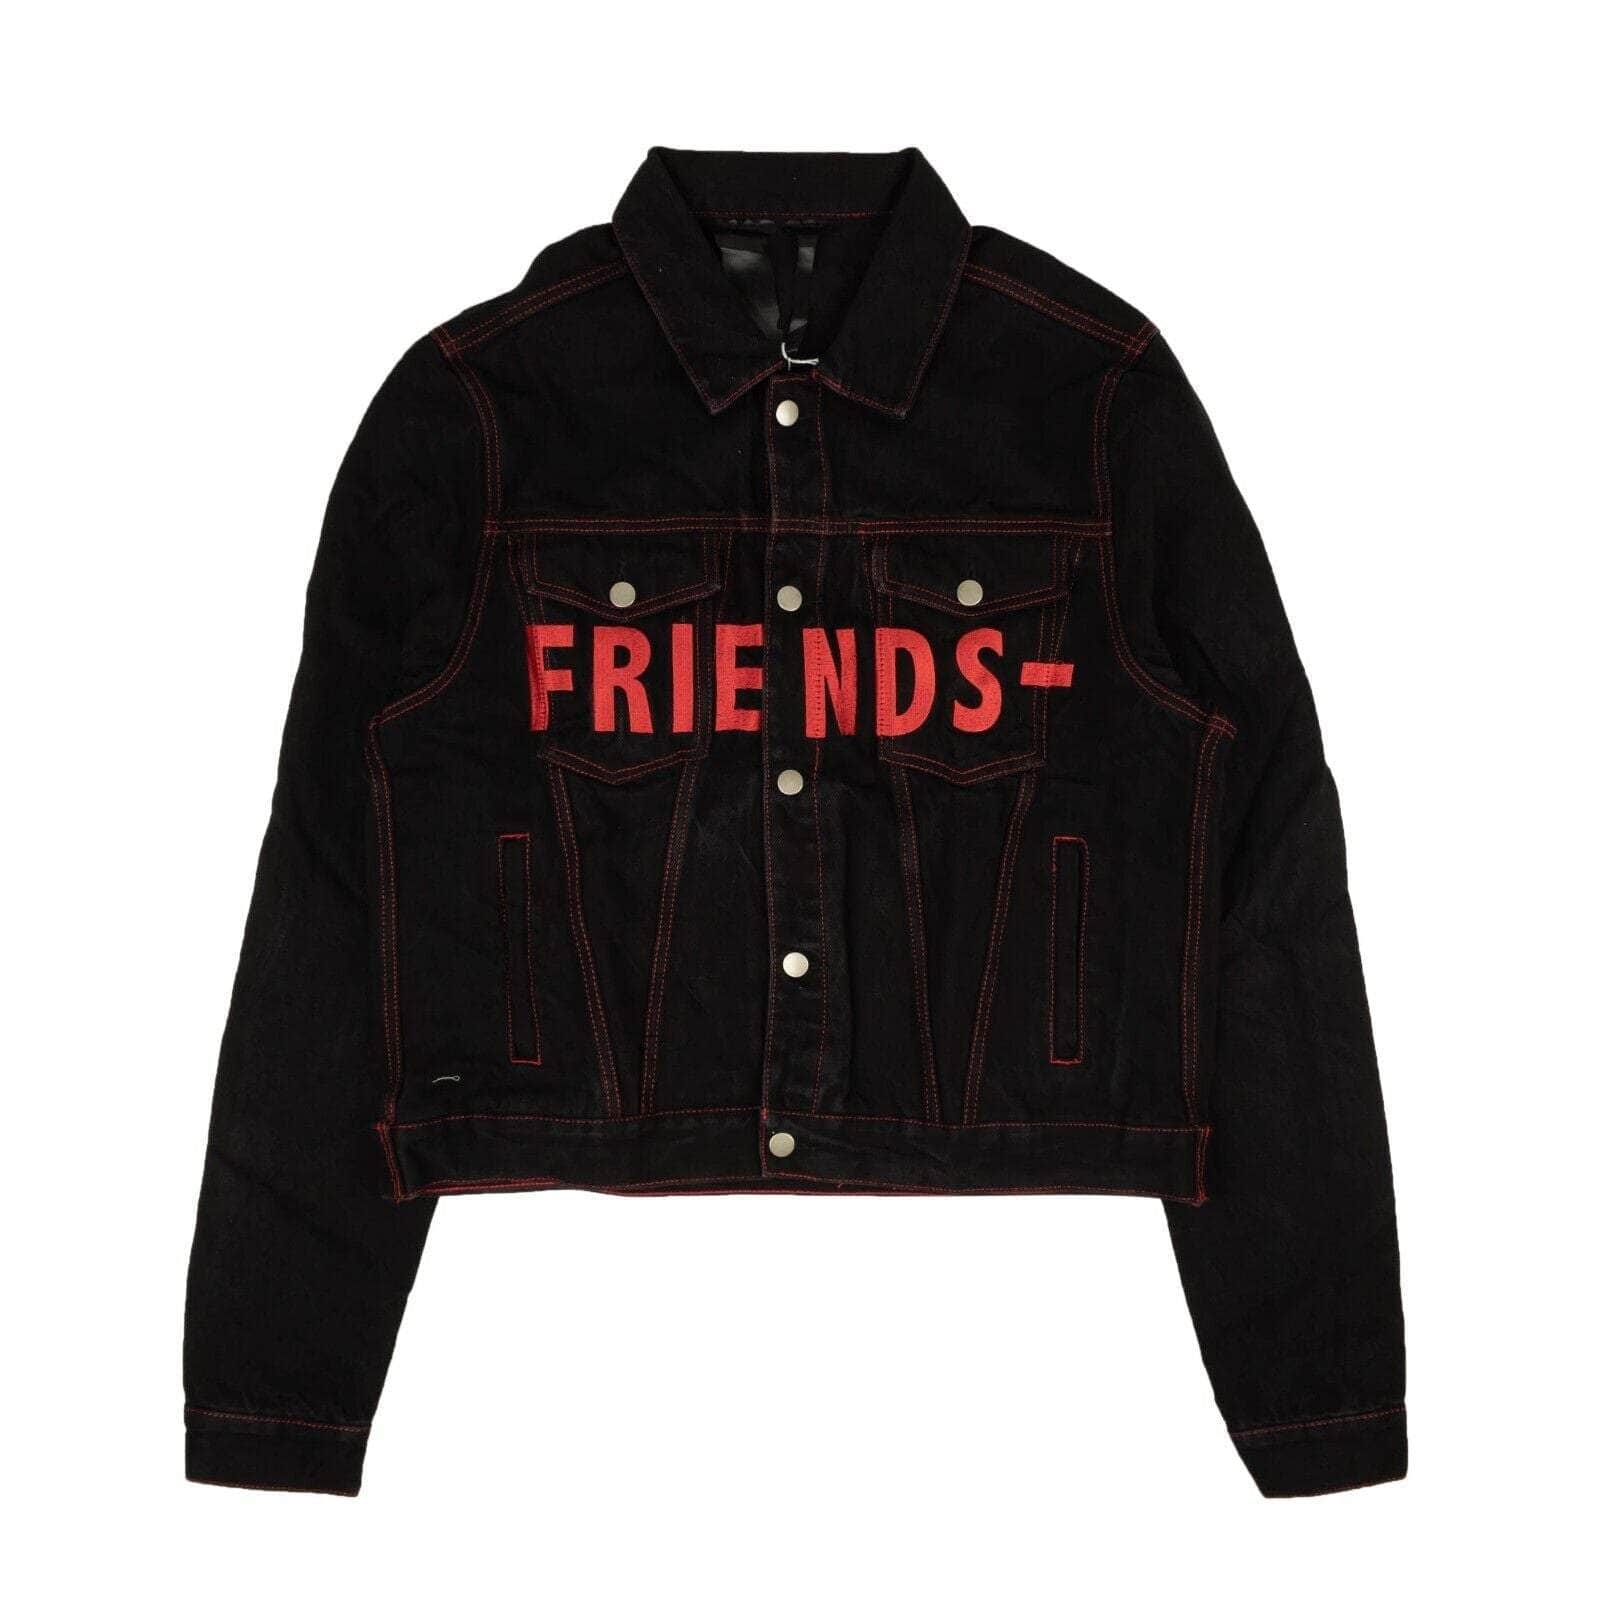 Vlone 750-1000, channelenable-all, chicmi, couponcollection, gender-mens, main-clothing, mens-denim-jackets, mens-shoes, size-l, size-m, size-xl, size-xxl, vlone Black And Red Friends Denim Jacket